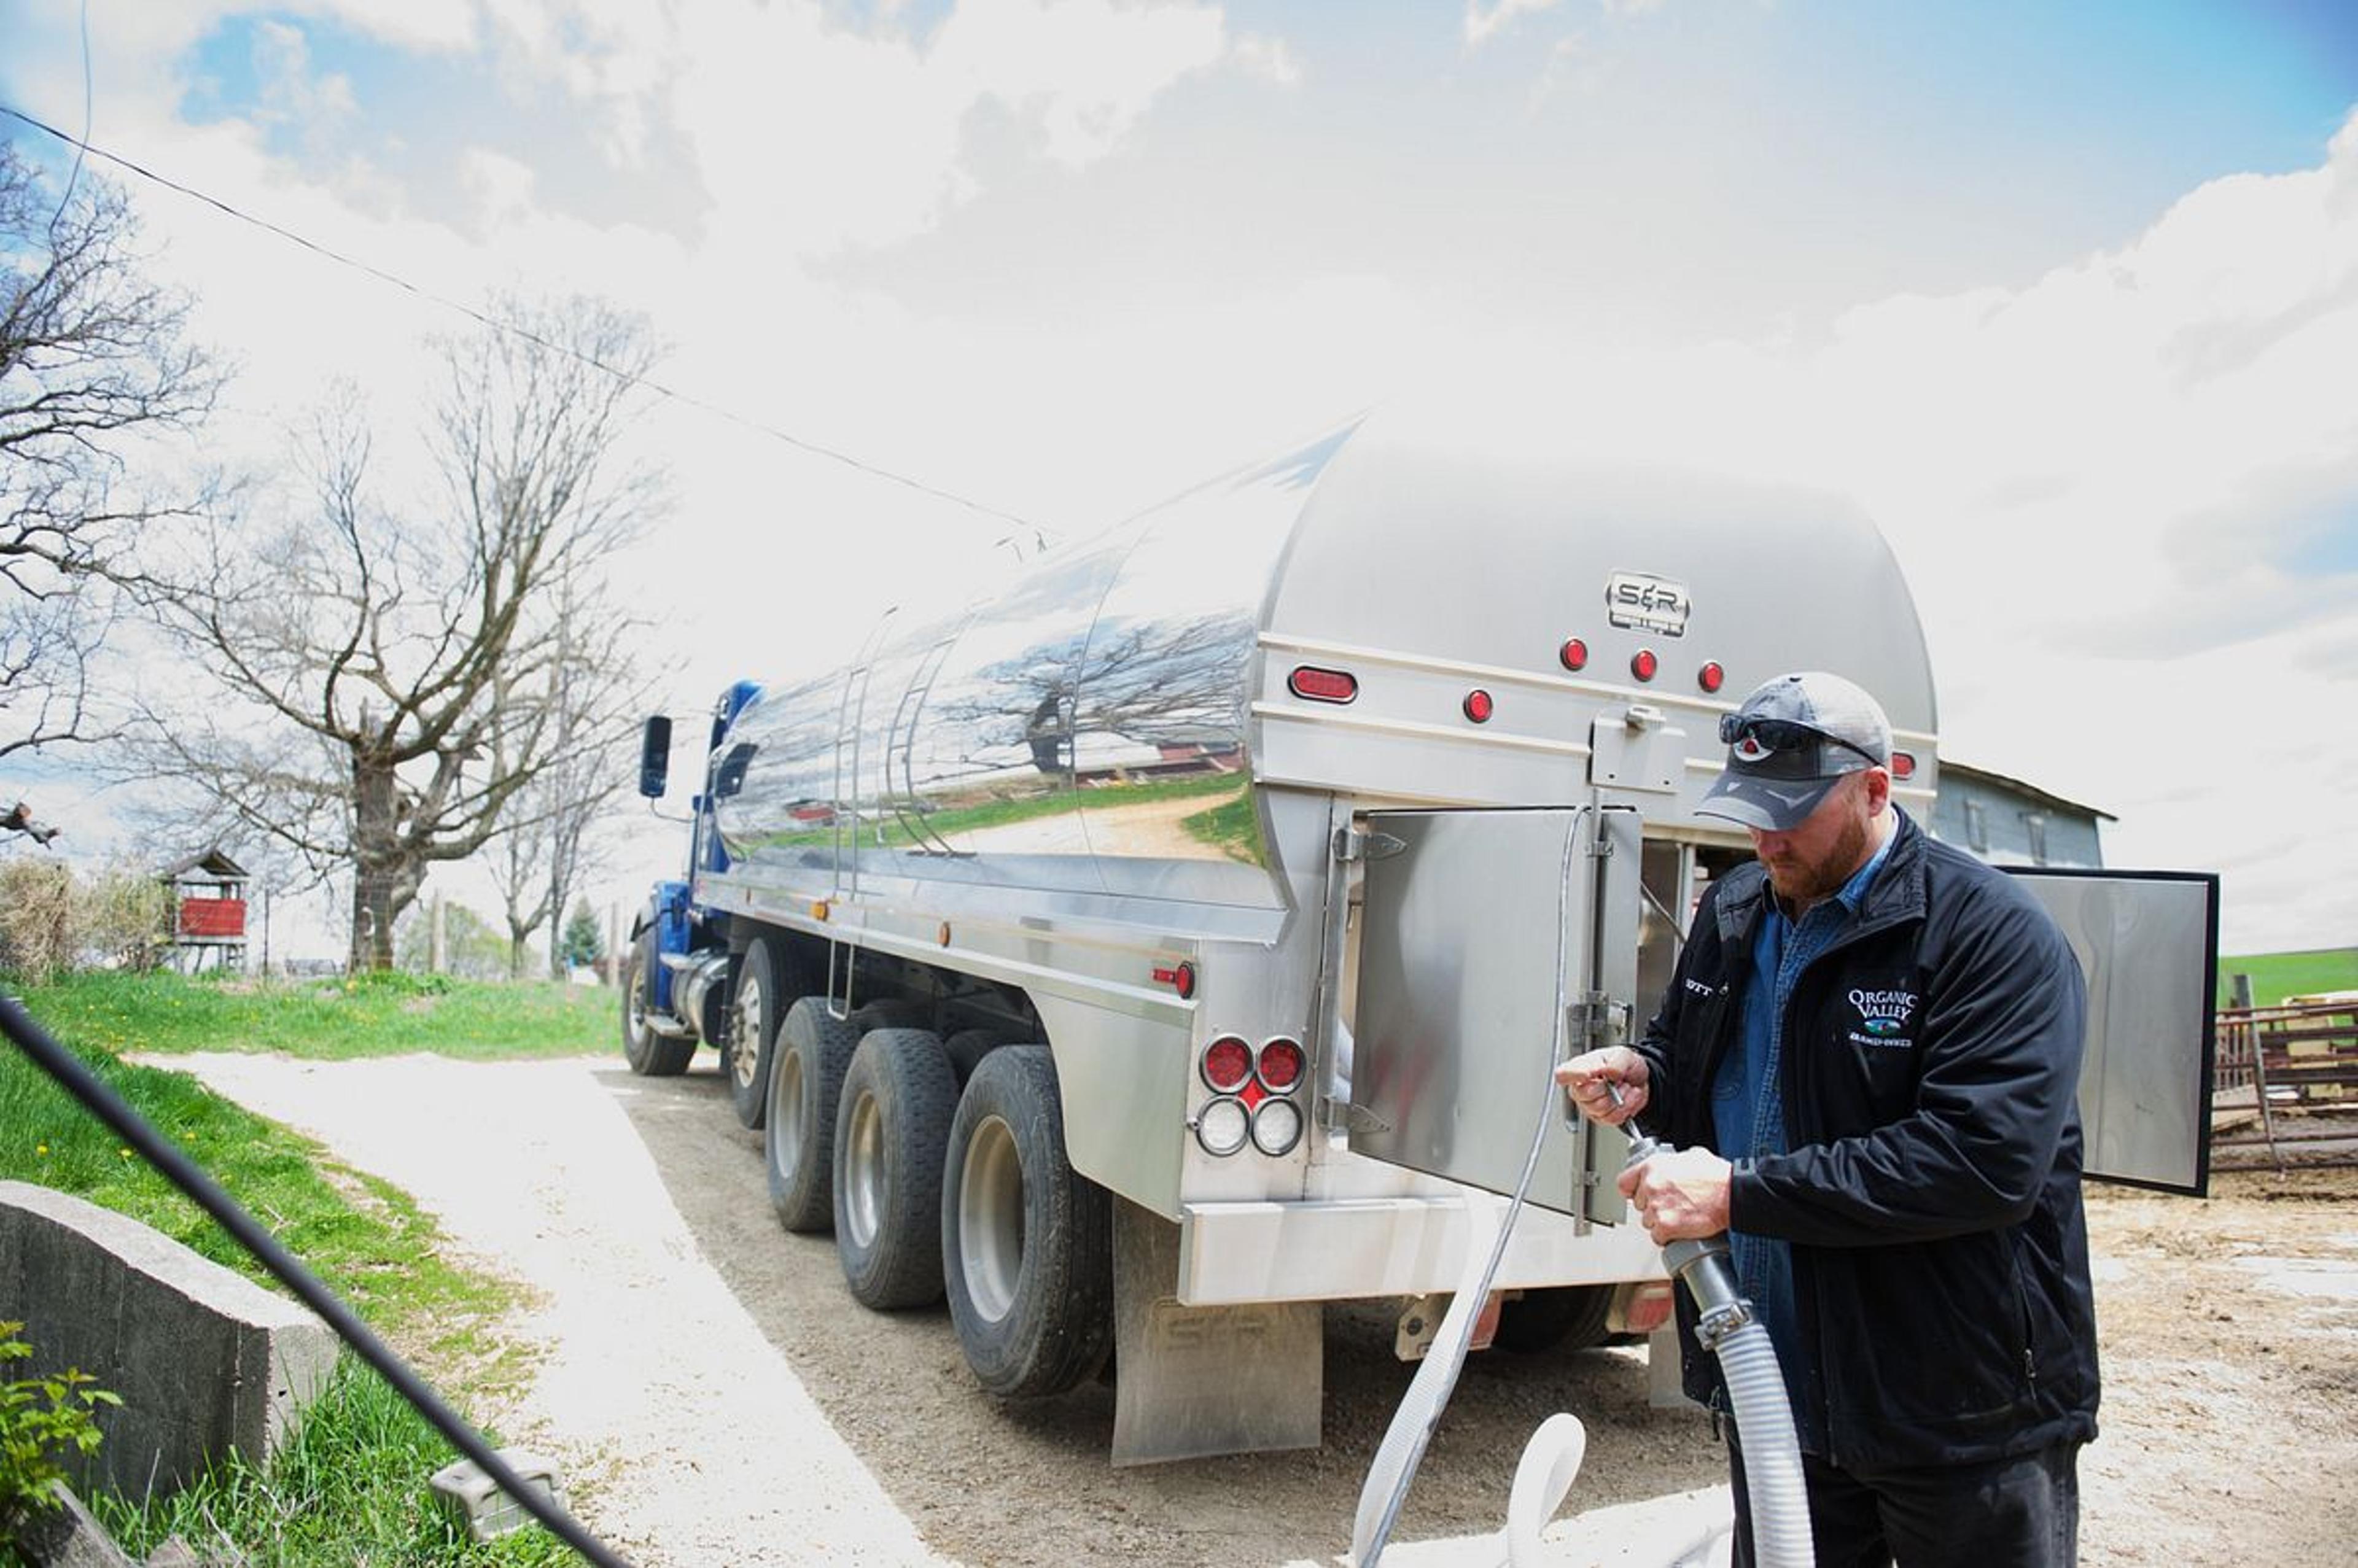 Organic milk is pumped into the milk truck on an organic dairy farm in Wisconsin.